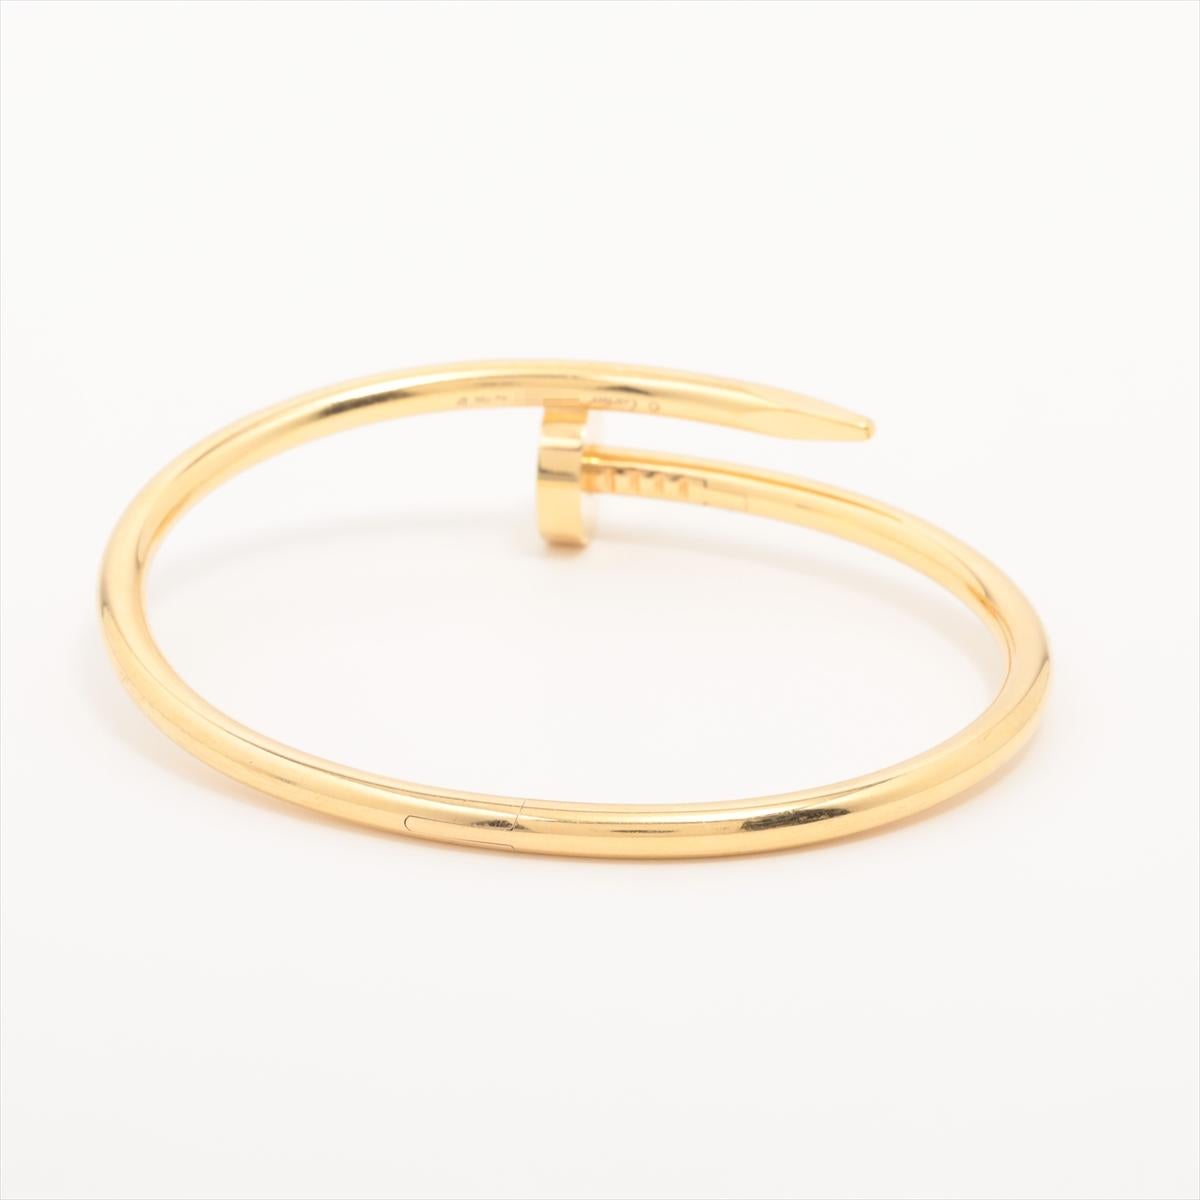 Cartier Juste un Clou Bracelet 750YG In Excellent Condition For Sale In Oyster Bay, NY